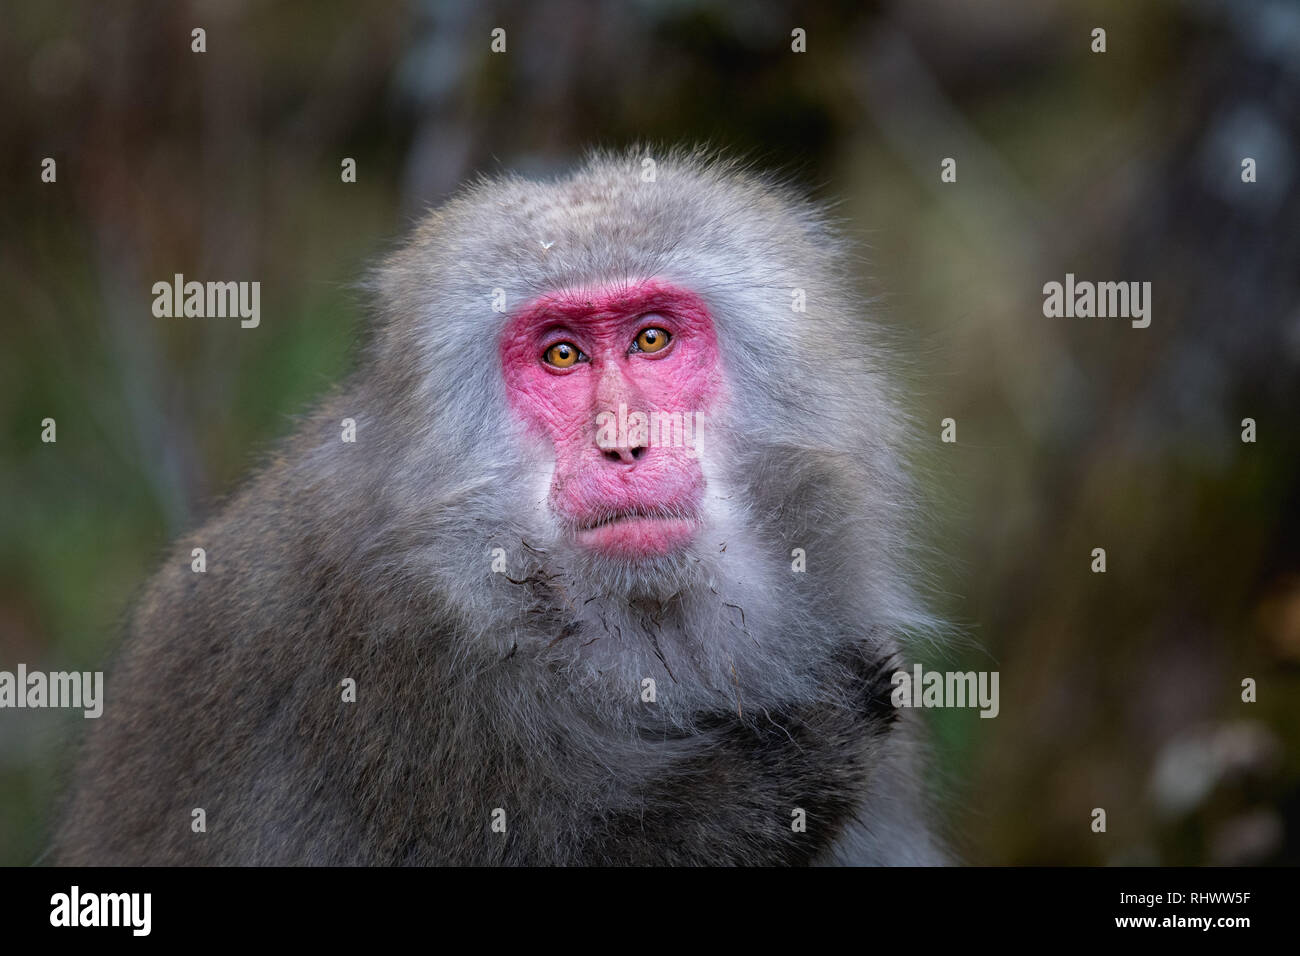 red faced Japanese macaque (Macaca fuscata) also known as snow monkey in Kamikochi. Kamikochi is located in the Japanese Alps of Chubu Sangaku Nationa Stock Photo